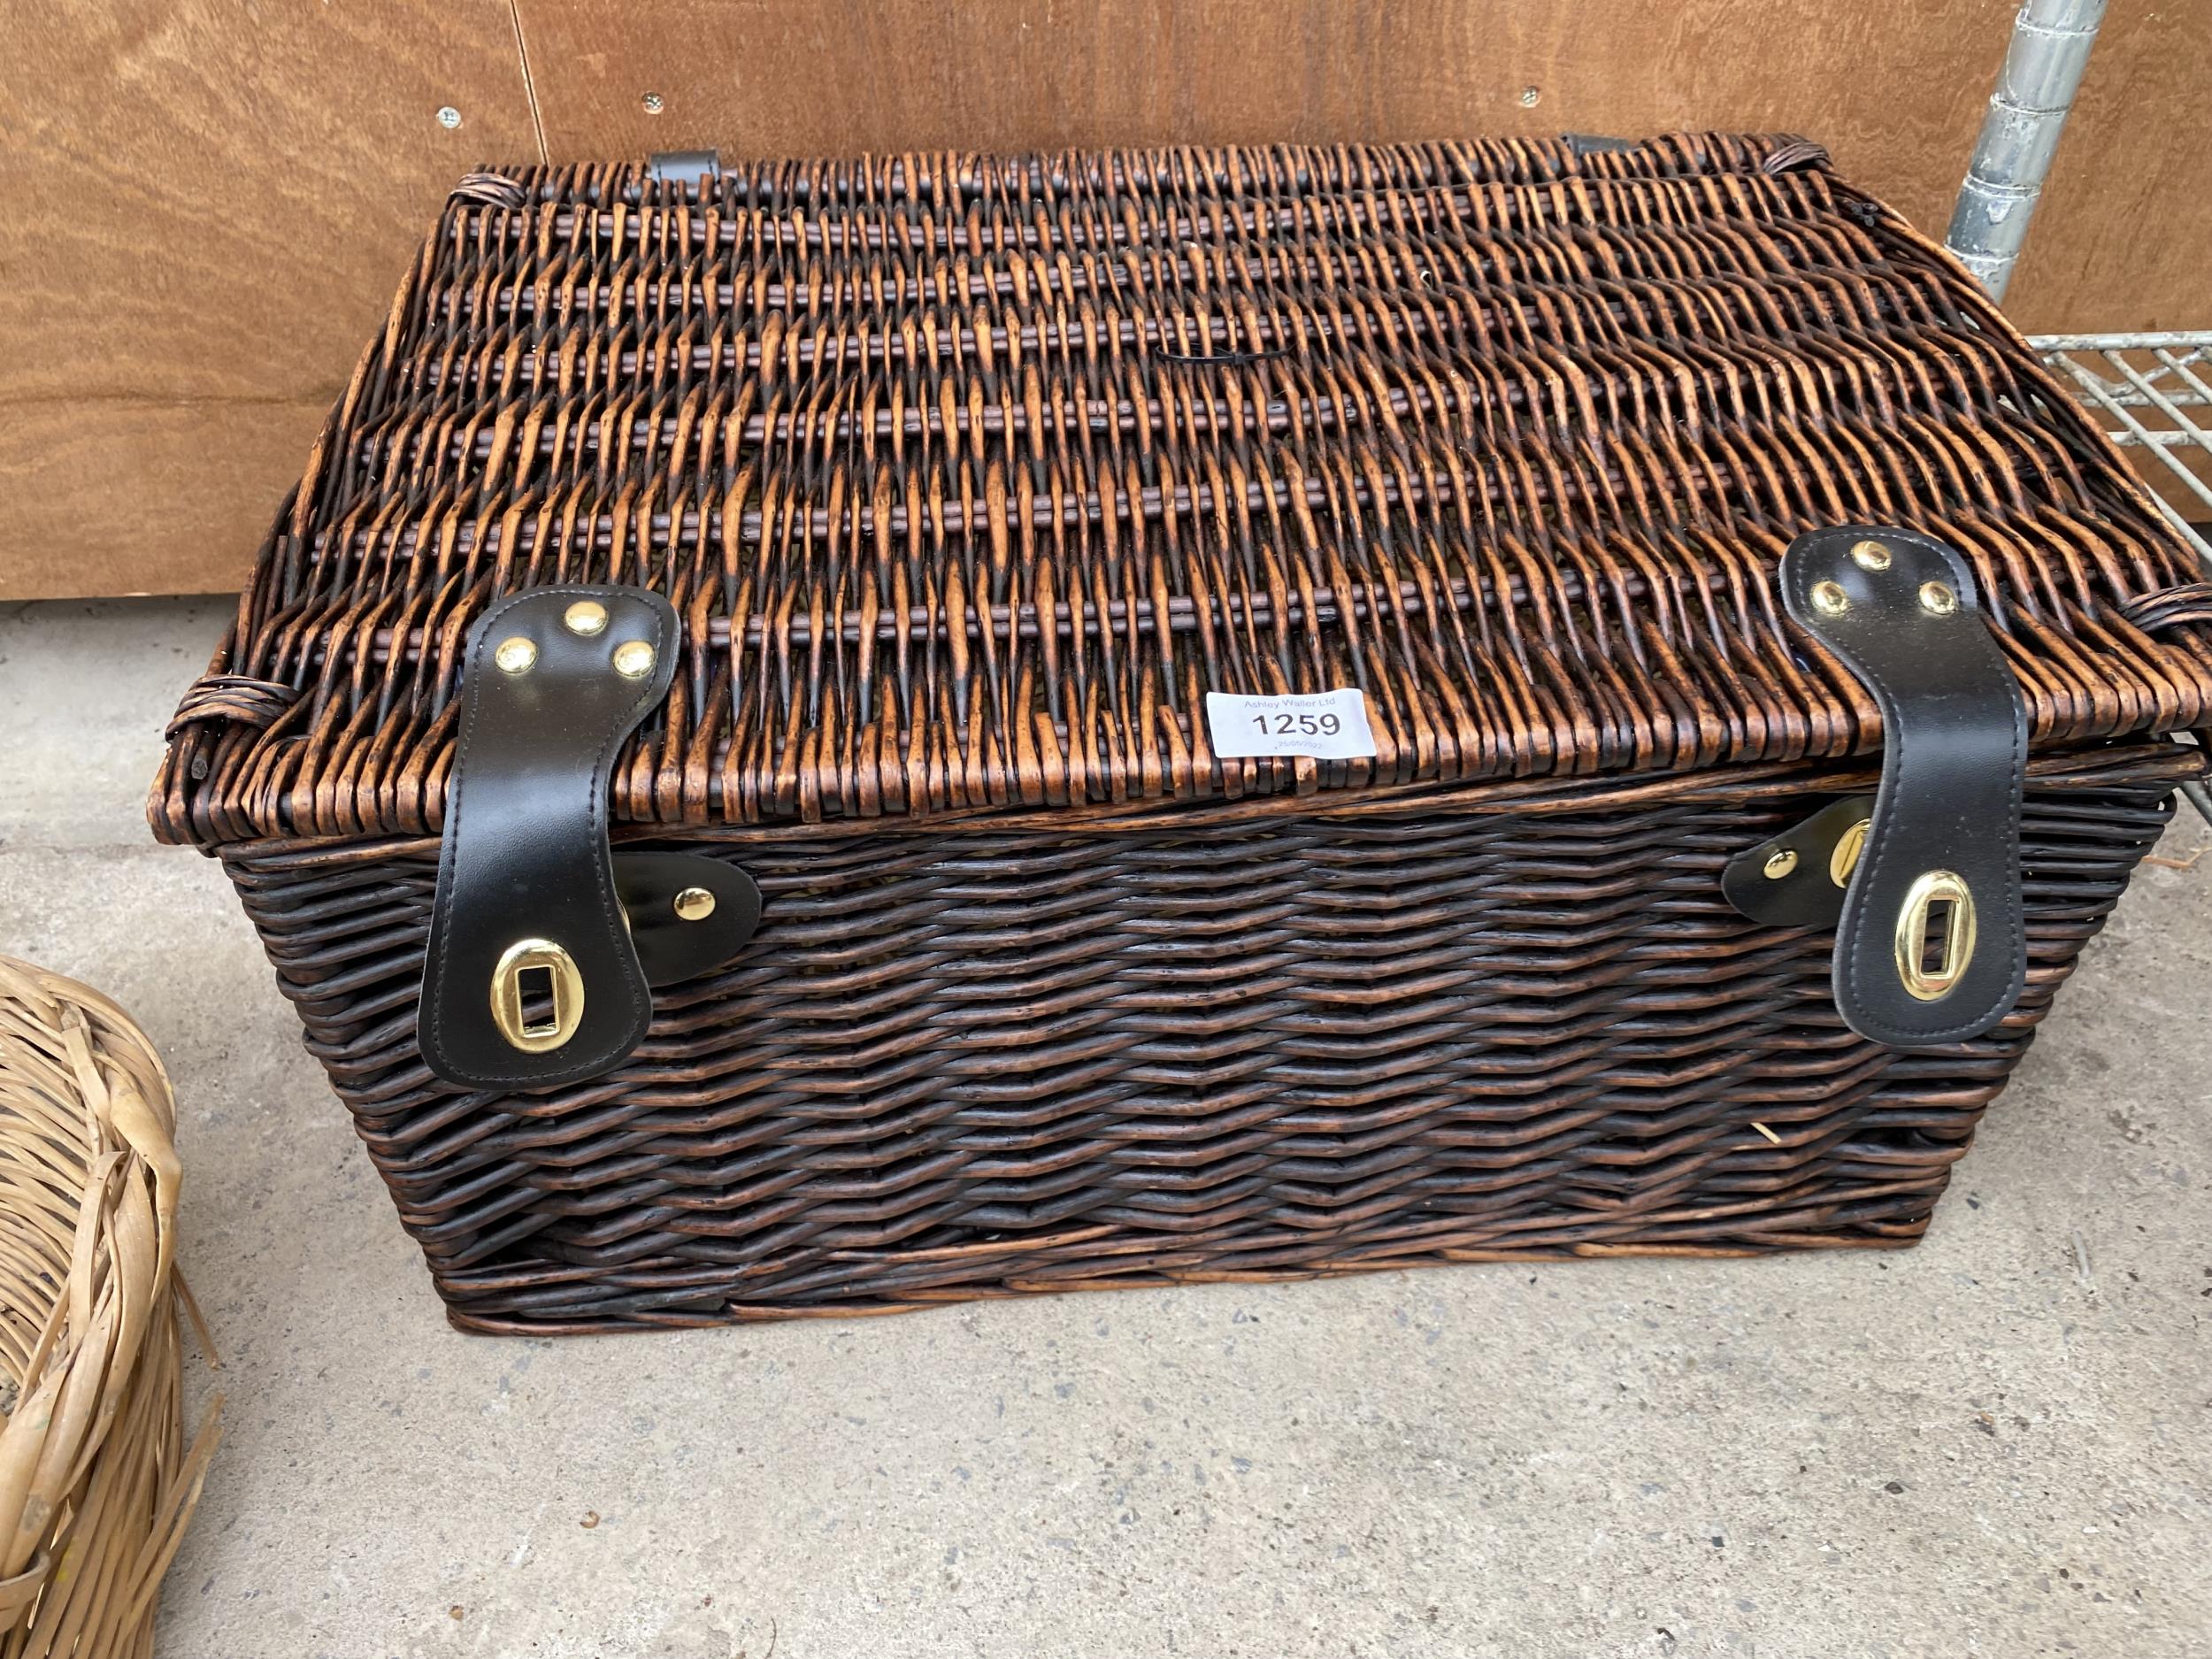 A WICKER PICNIC HAMPER AND TWO FURTHER WICKER BASKETS - Image 3 of 4